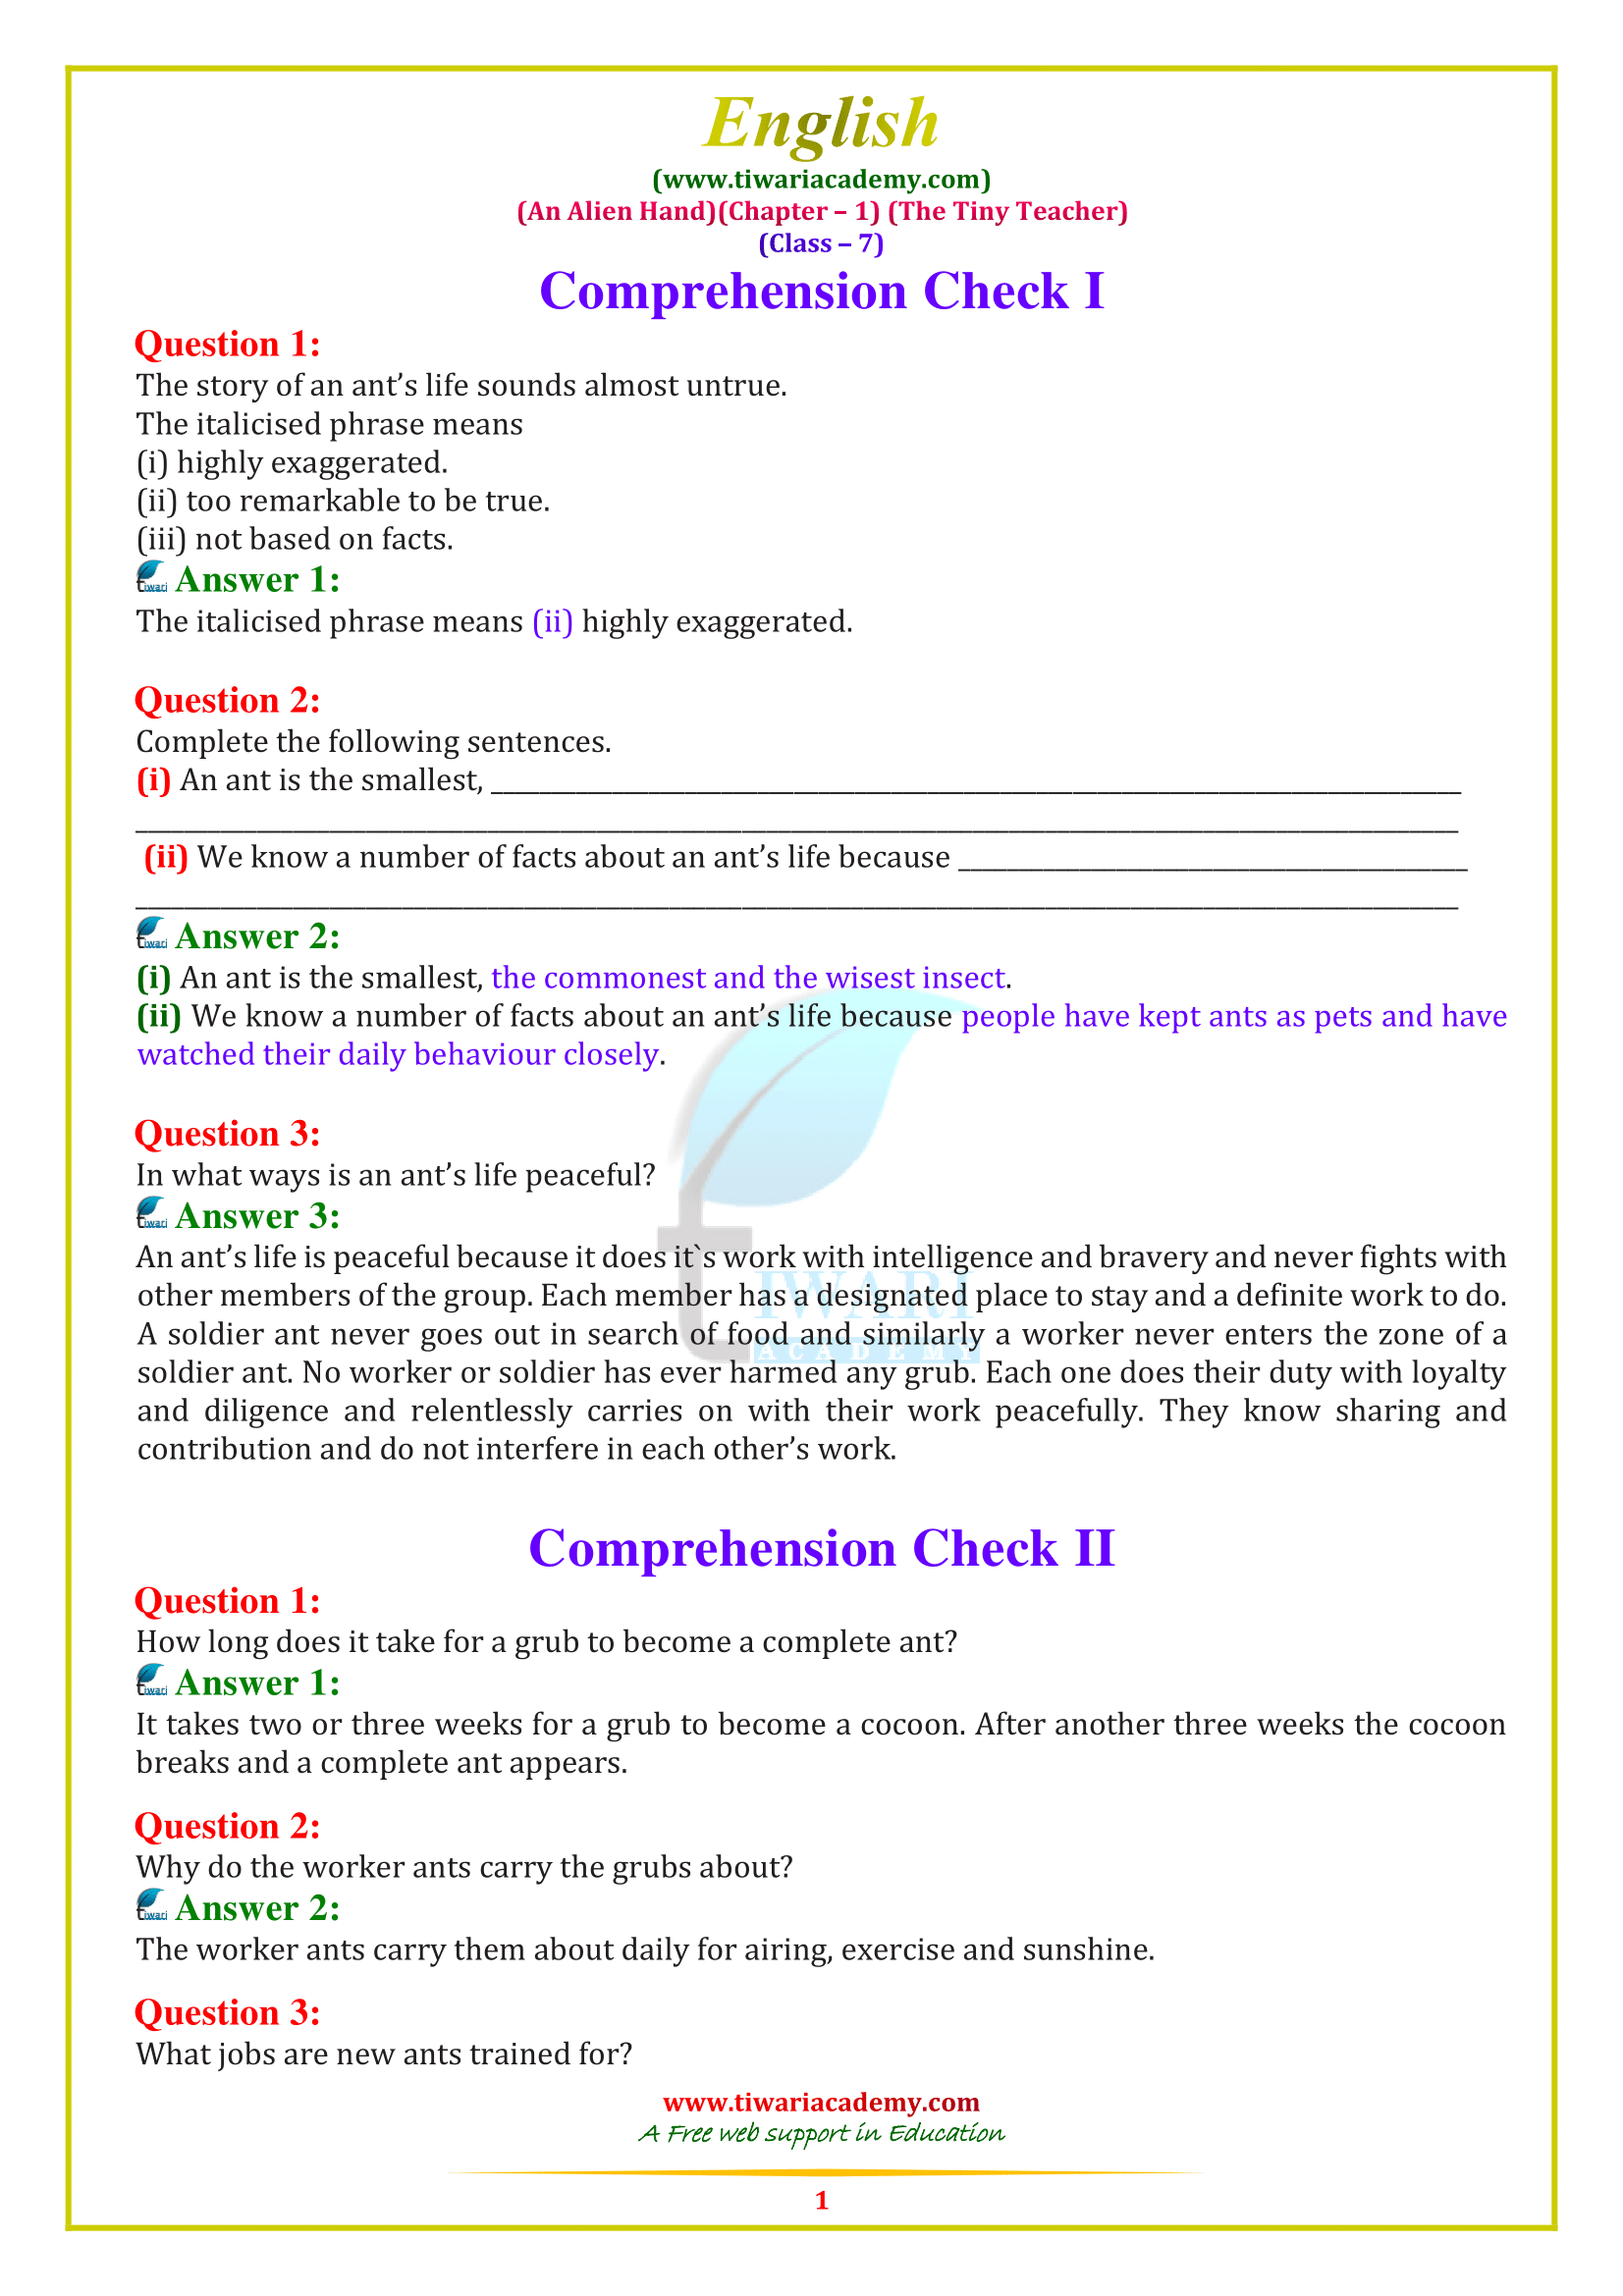 Class 7 English Chapter 1: The Tiny Teacher - Answers